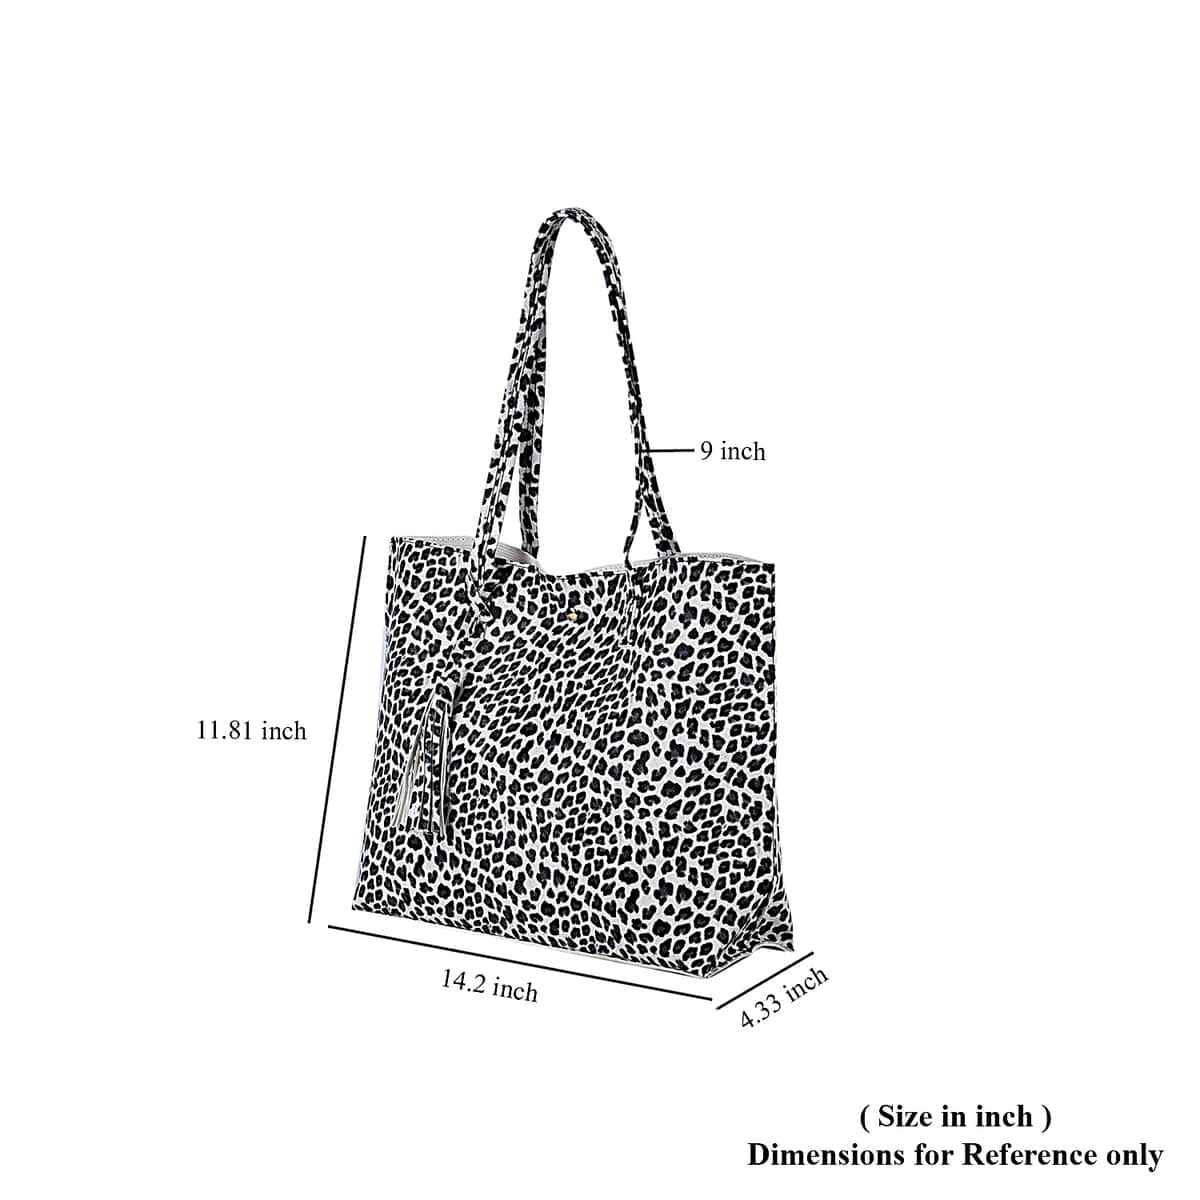 PASSAGE Black Leopard Pattern Faux Leather Tote Bag (14.2"x4.33"x11.81") with Handle Drop (9") image number 6